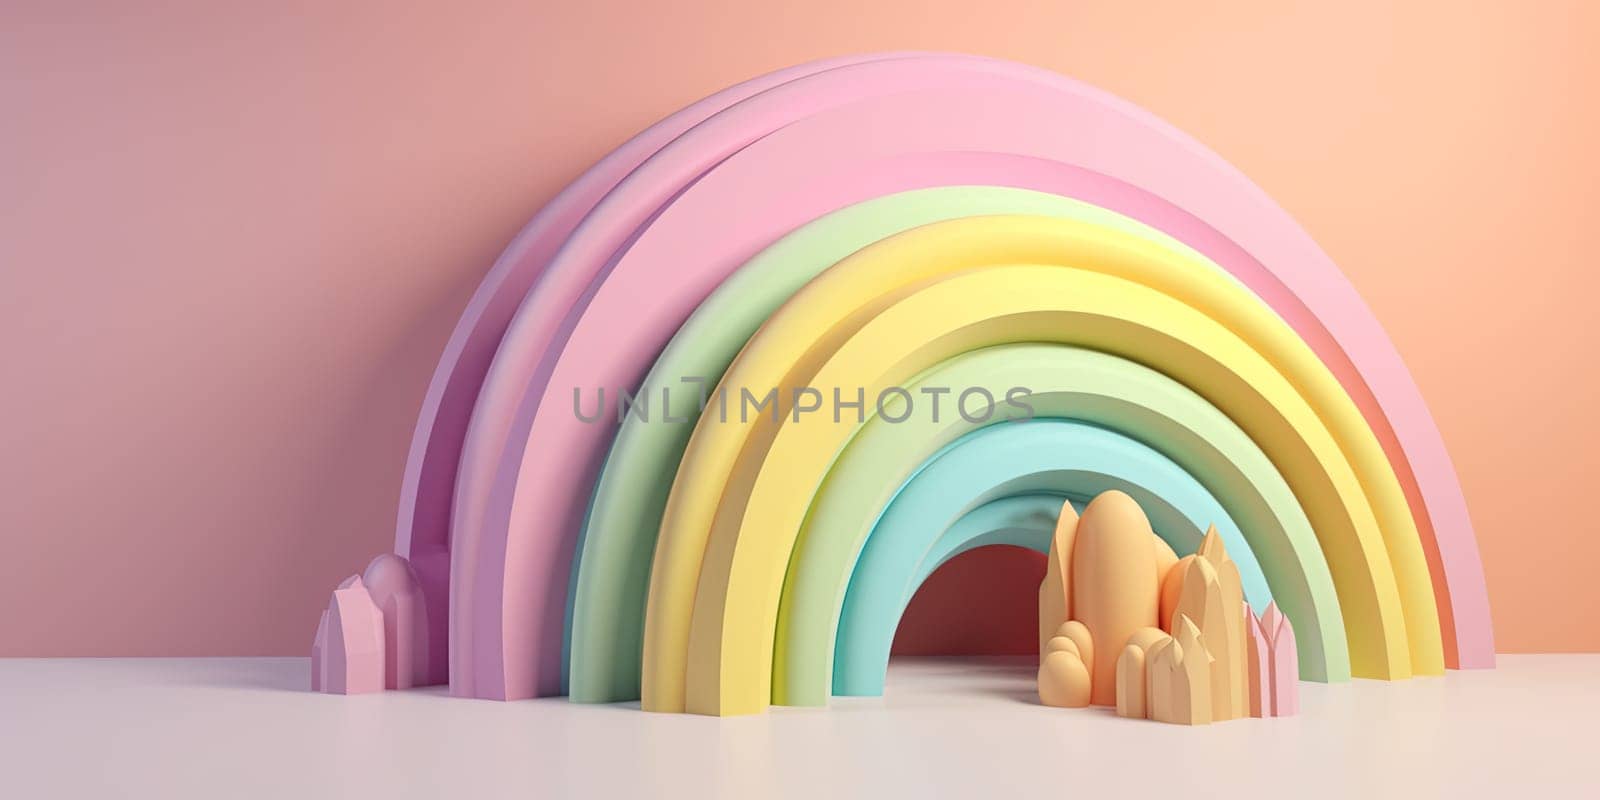 3D Illustration Of Rainbow As A Kid'S Toy by tan4ikk1